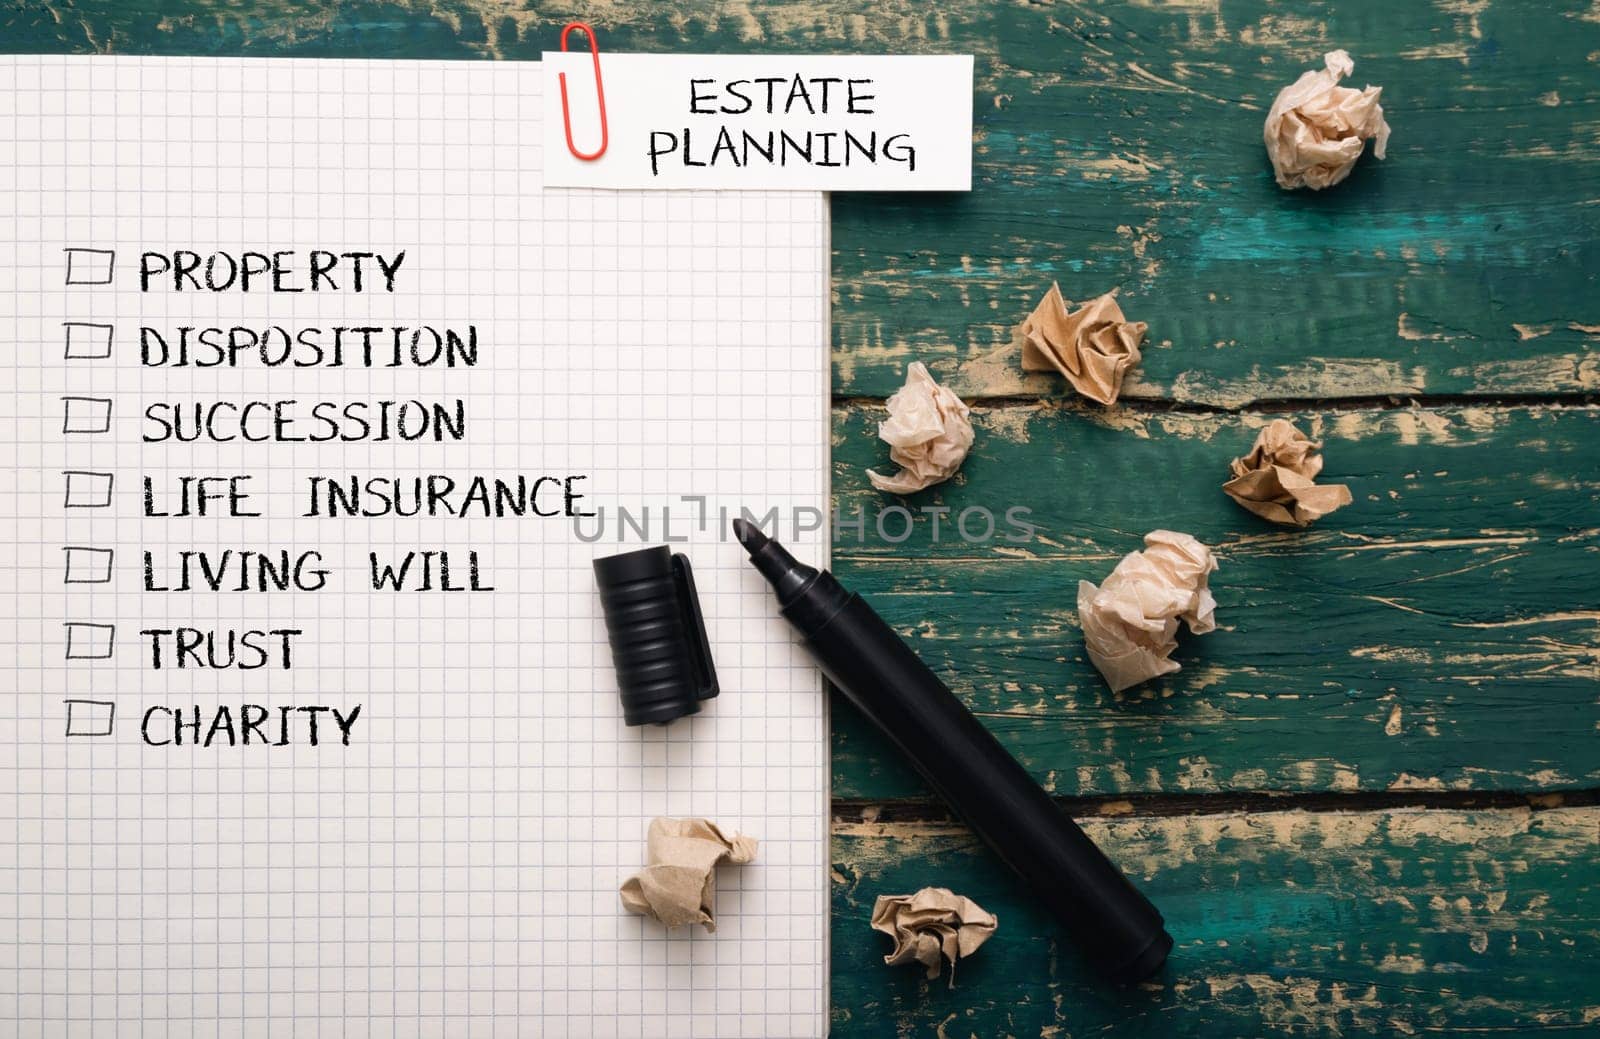 Estate planning is a process of organizing and managing a person's assets and property after they pass away